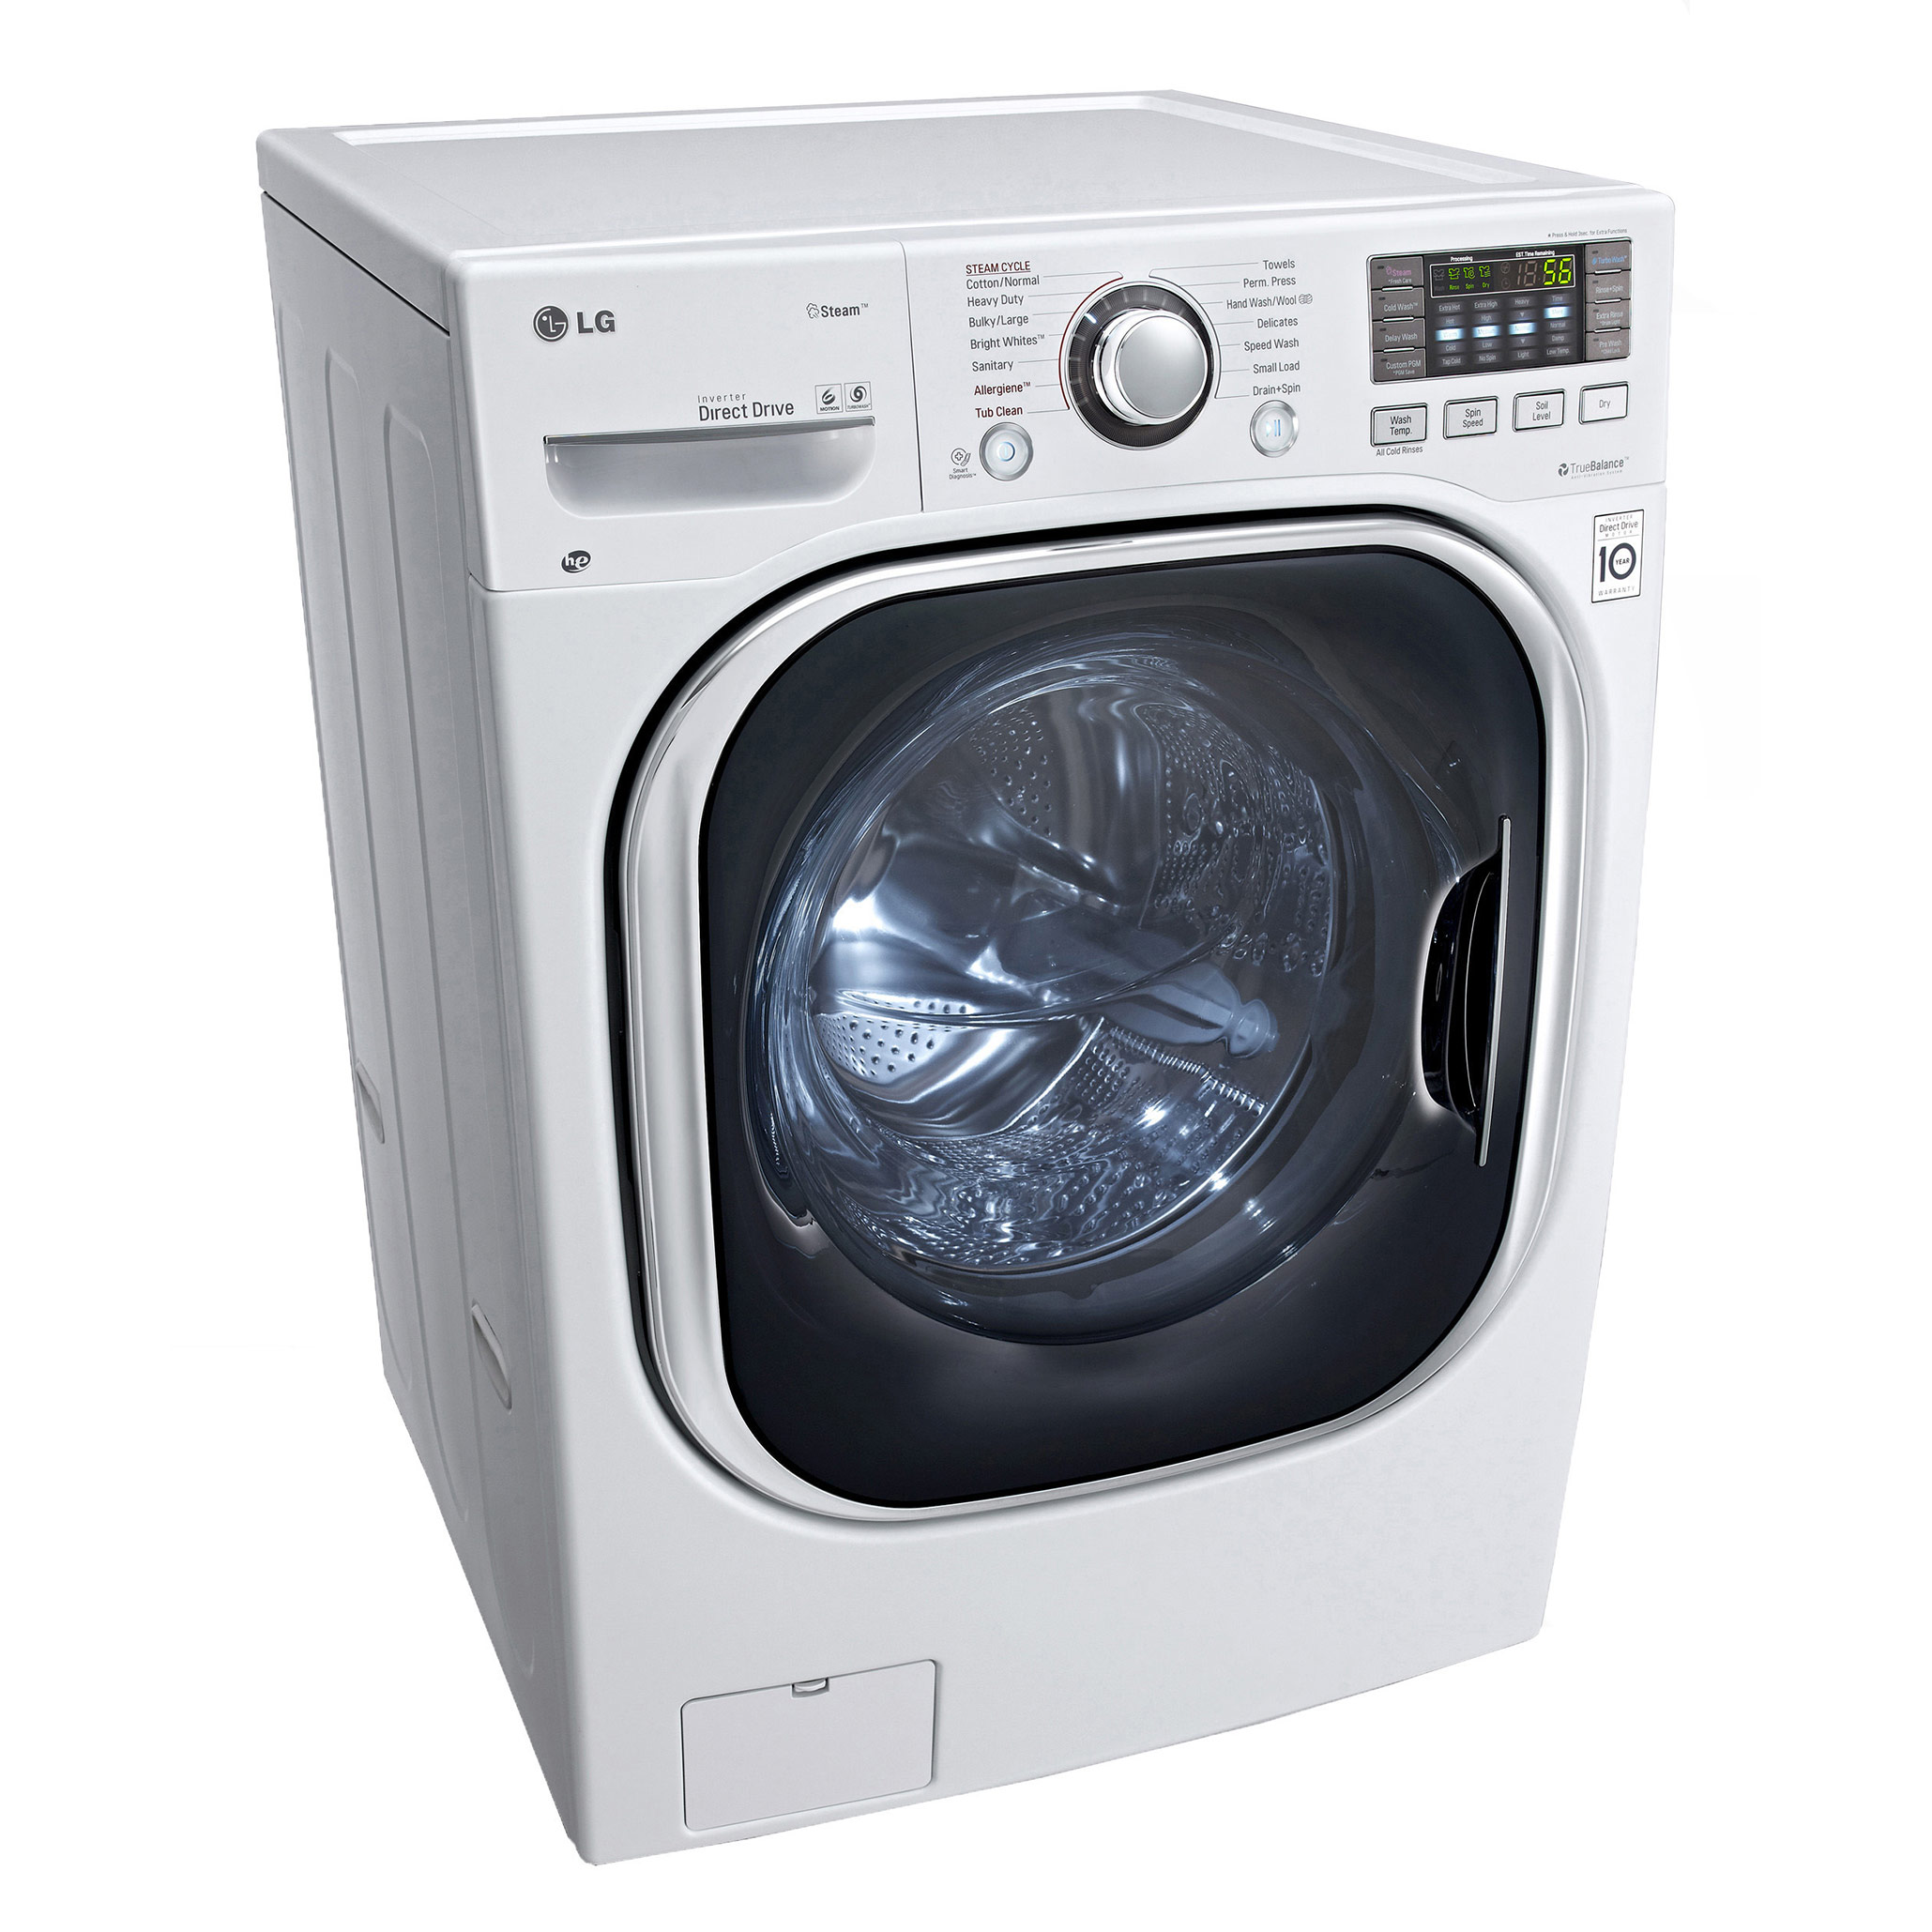 LG WM3997HWA All in One Washer Dryer Combo